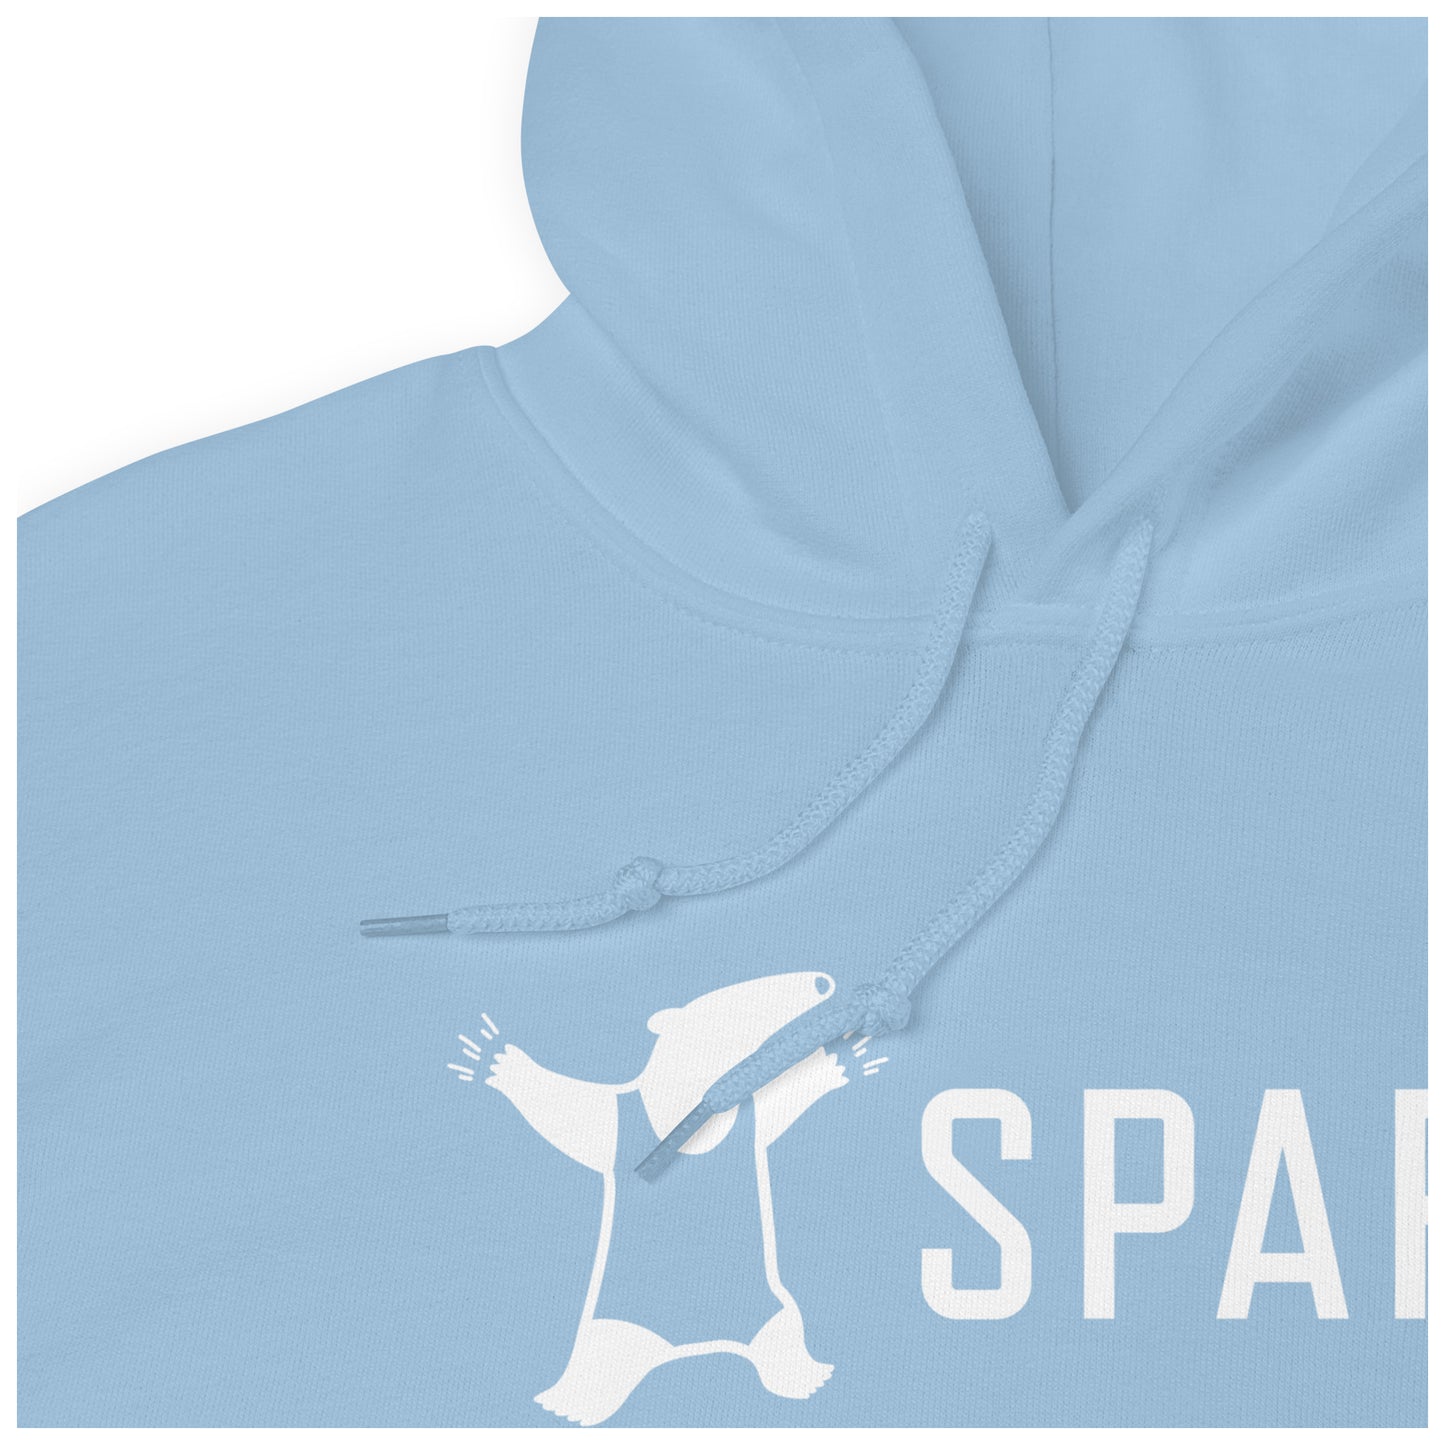 Unisex SPARS Light Blue basic logo hoodie - front placement